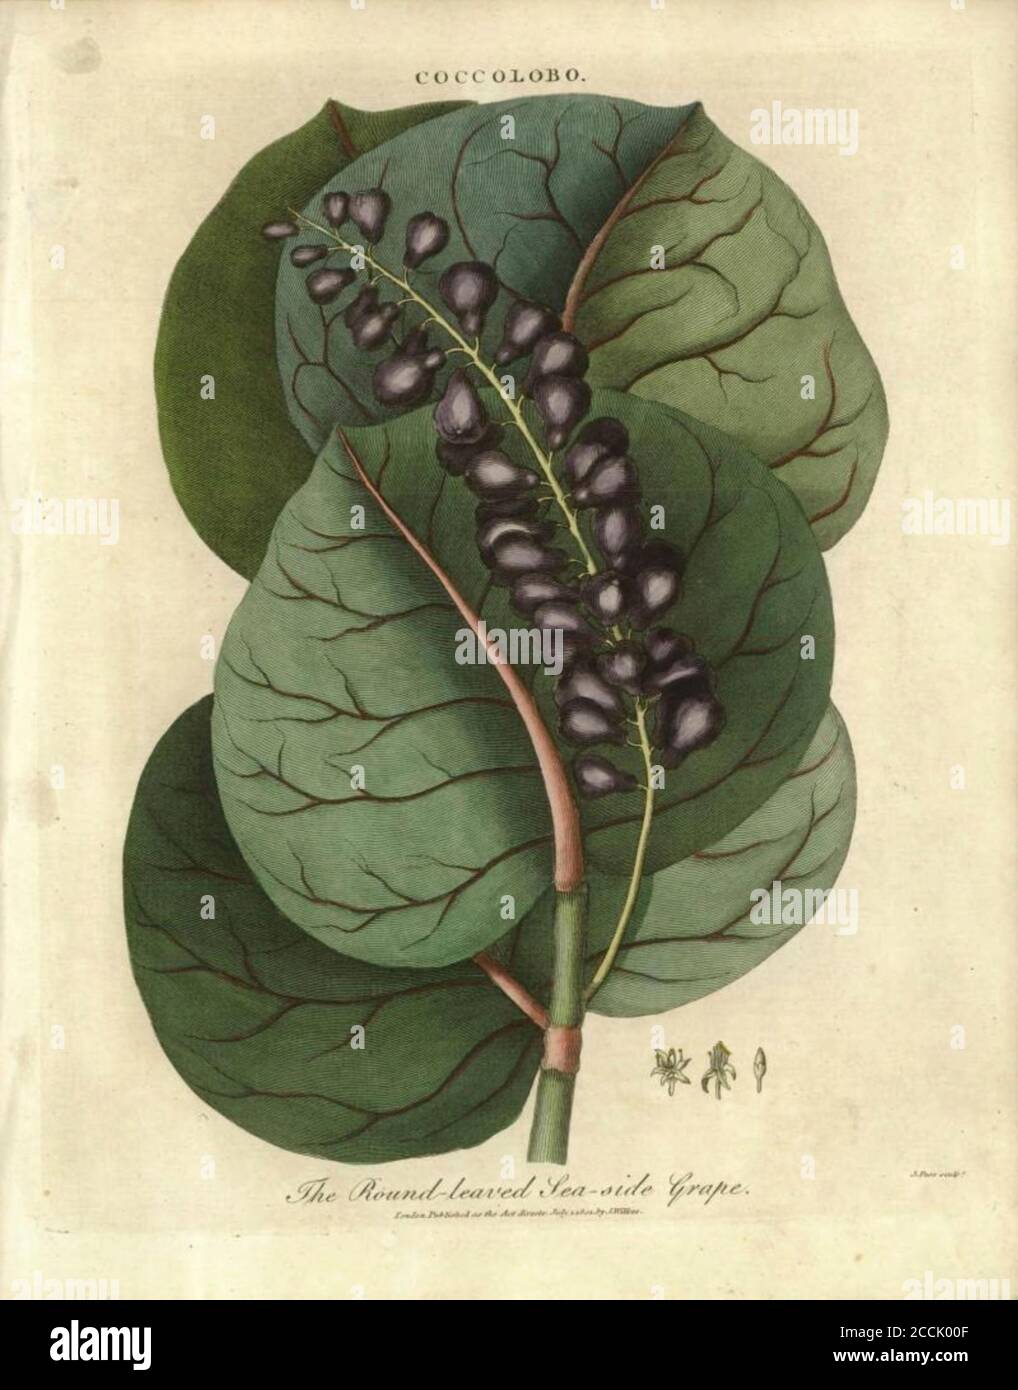 Coccolobo [Coccoloba uvifera] Round leaved Sea-side grape [Seagrape] Coccoloba uvifera is a species of flowering plant in the buckwheat family, Polygonaceae, Common names include seagrape and baygrape. Handcolored copperplate engraving From the Encyclopaedia Londinensis or, Universal dictionary of arts, sciences, and literature; Volume IV;  Edited by Wilkes, John. Published in London in 1810 Stock Photo